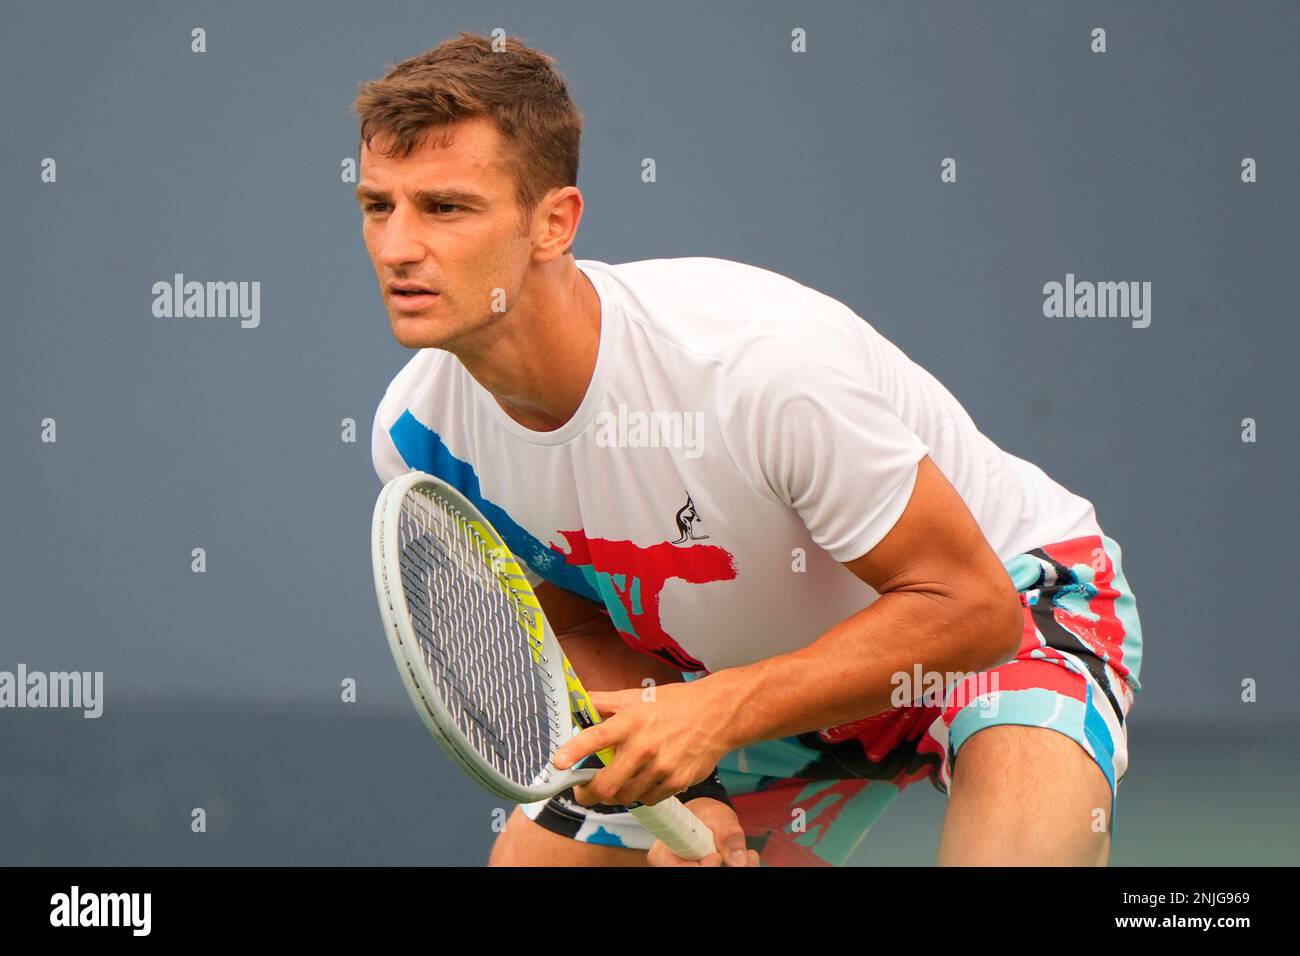 Riccardo Bonadio in action during a Mens Qualifying Singles match at the 2022 US Open, Friday, Aug